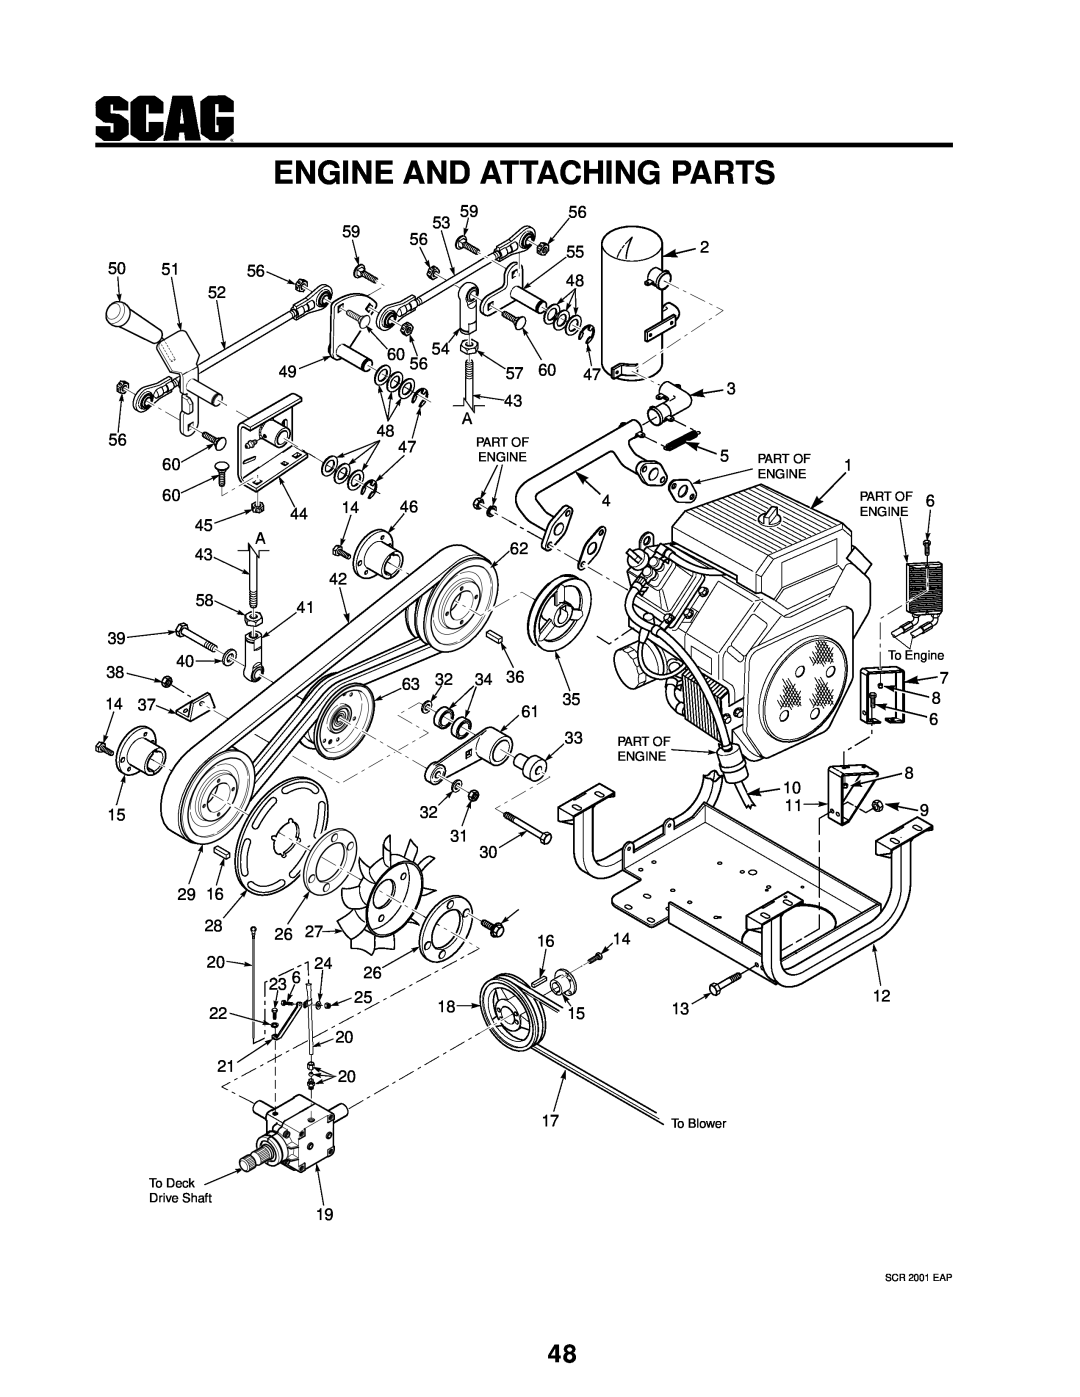 MB QUART SCR manual Part Of, To Deck Drive Shaft, To Blower, PART OF ENGINE To Engine, Engine And Attaching Parts 